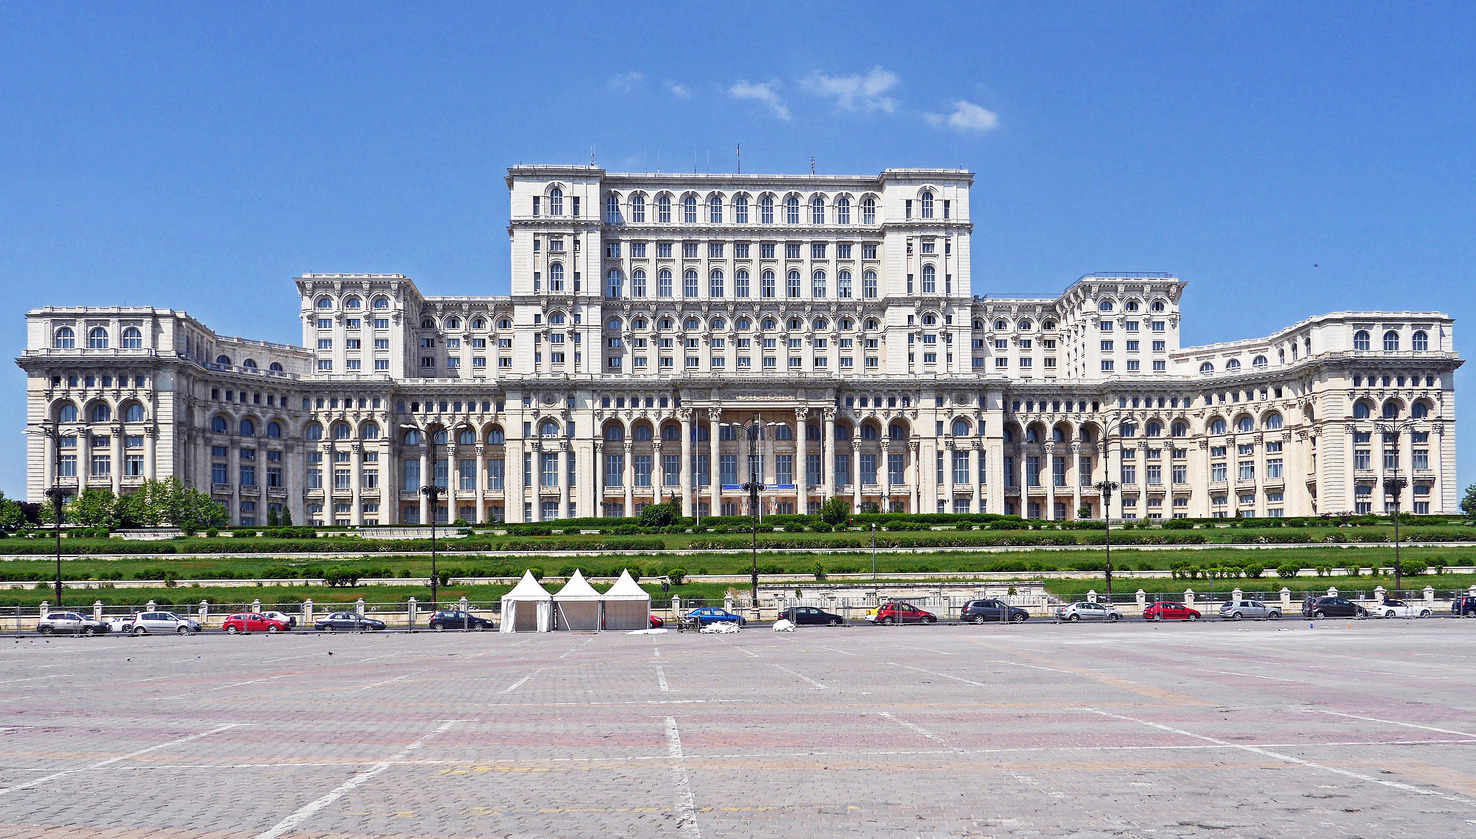 Large parliament palace in bucharest romania